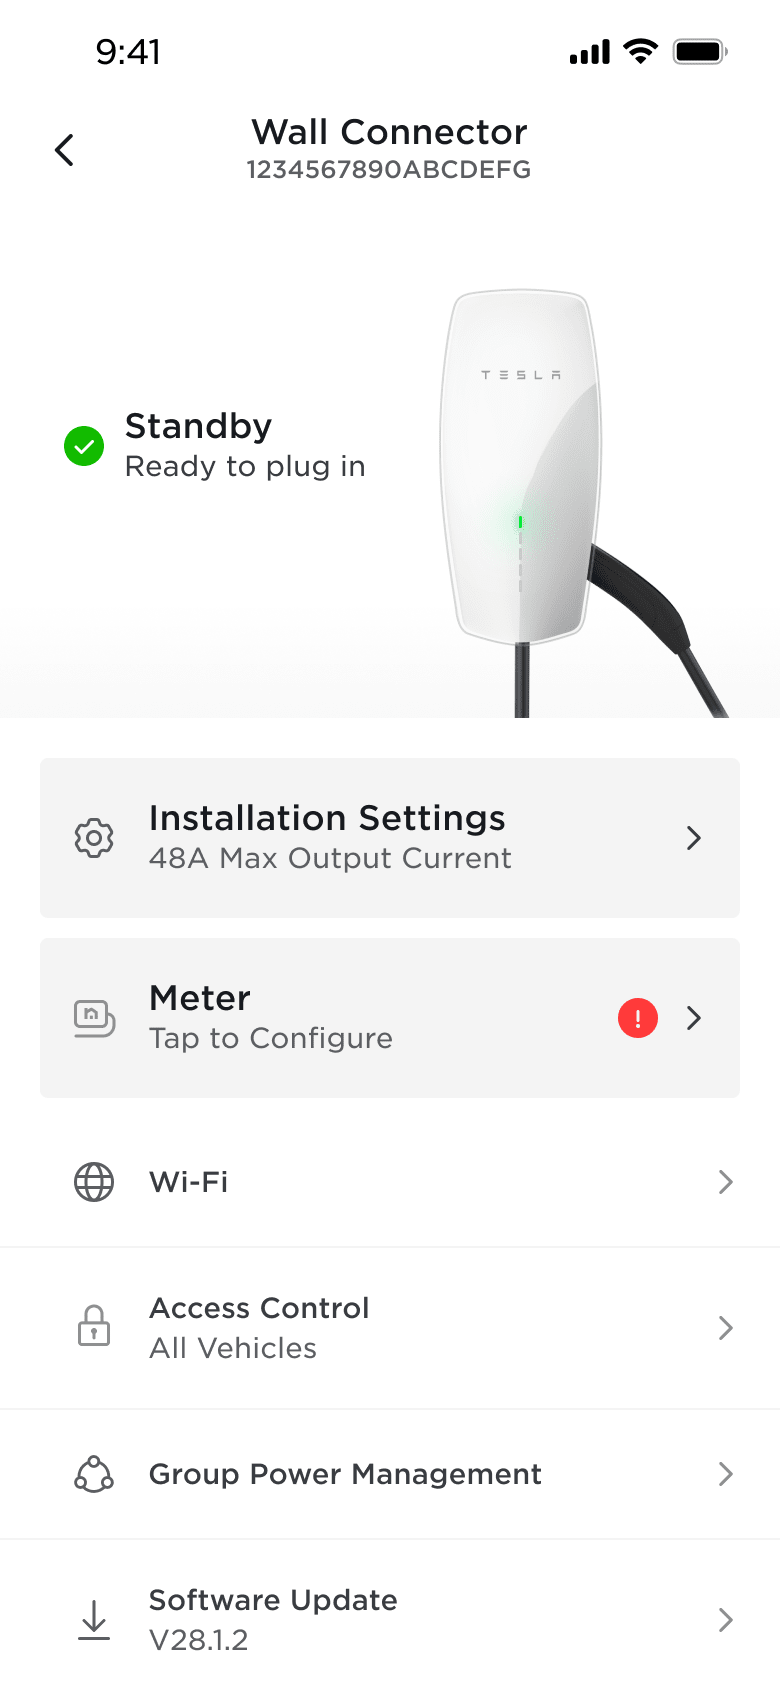 Tesla app screen showing meter configuration setting for Wall connetor